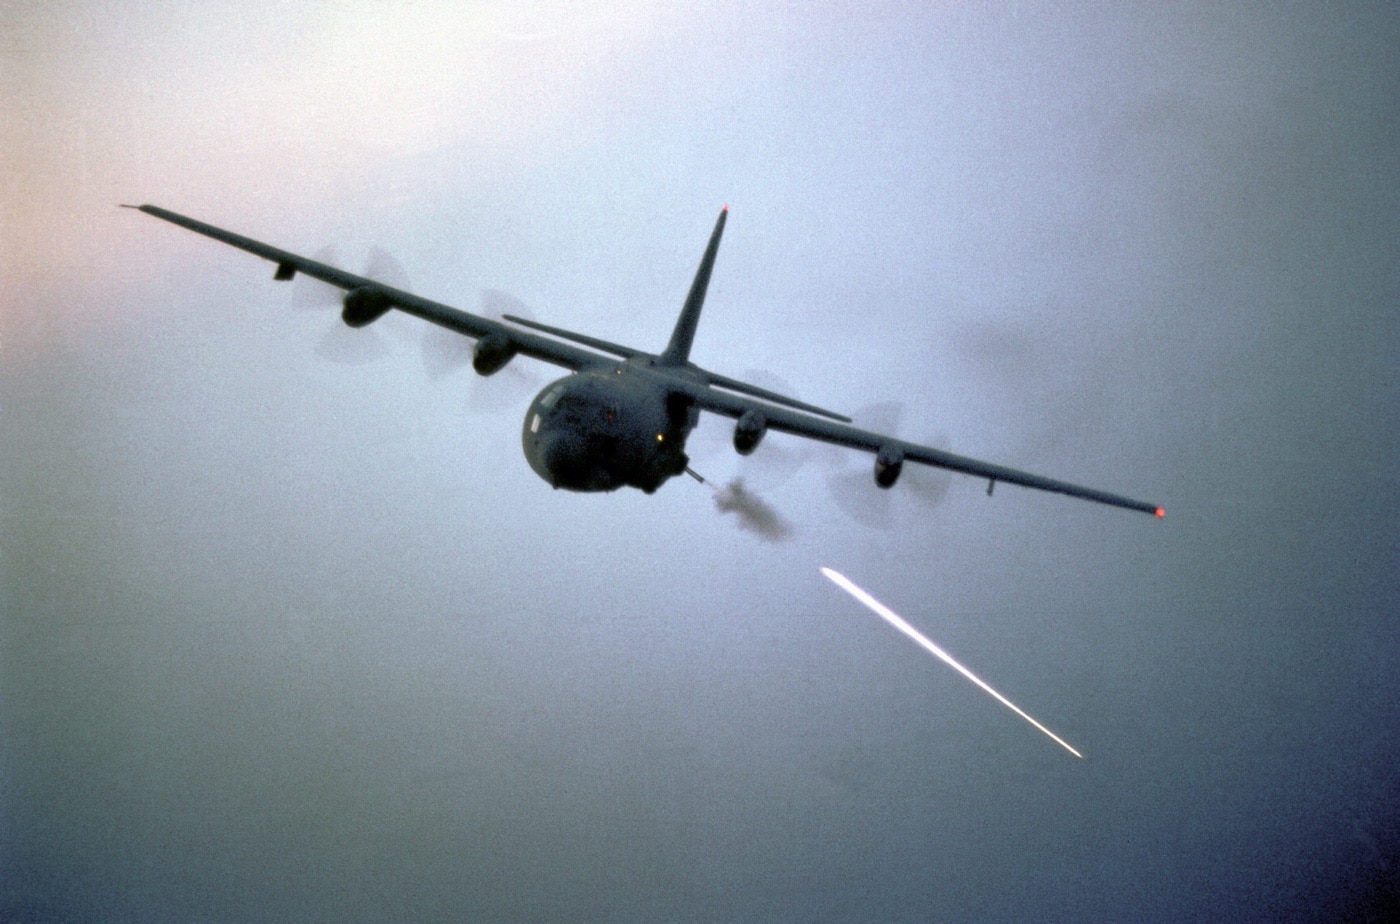 ac-130 on a training mission in 1980